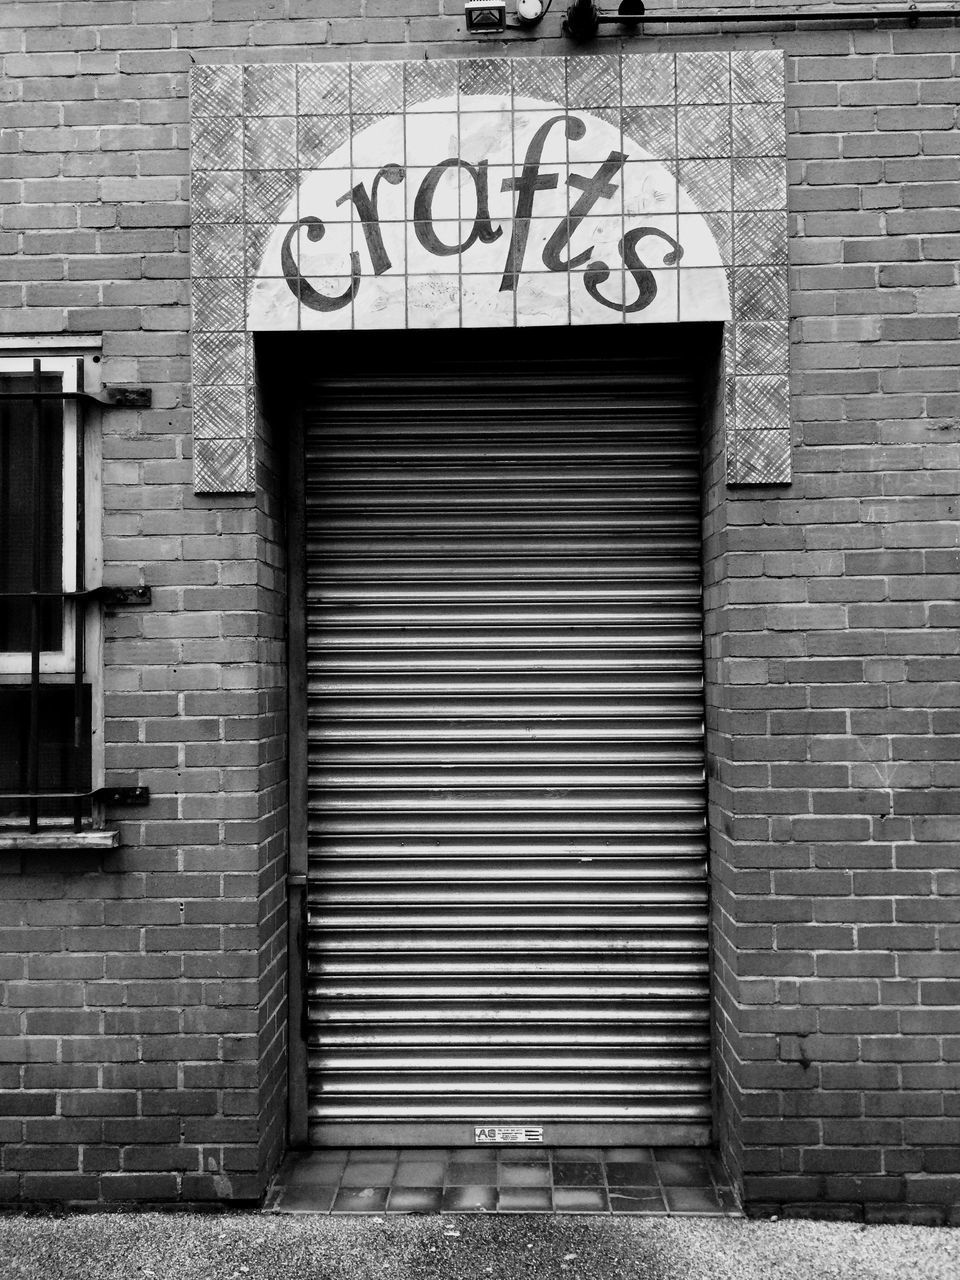 building exterior, architecture, built structure, brick wall, text, wall - building feature, closed, western script, communication, wall, door, window, outdoors, graffiti, shutter, day, house, sidewalk, no people, entrance